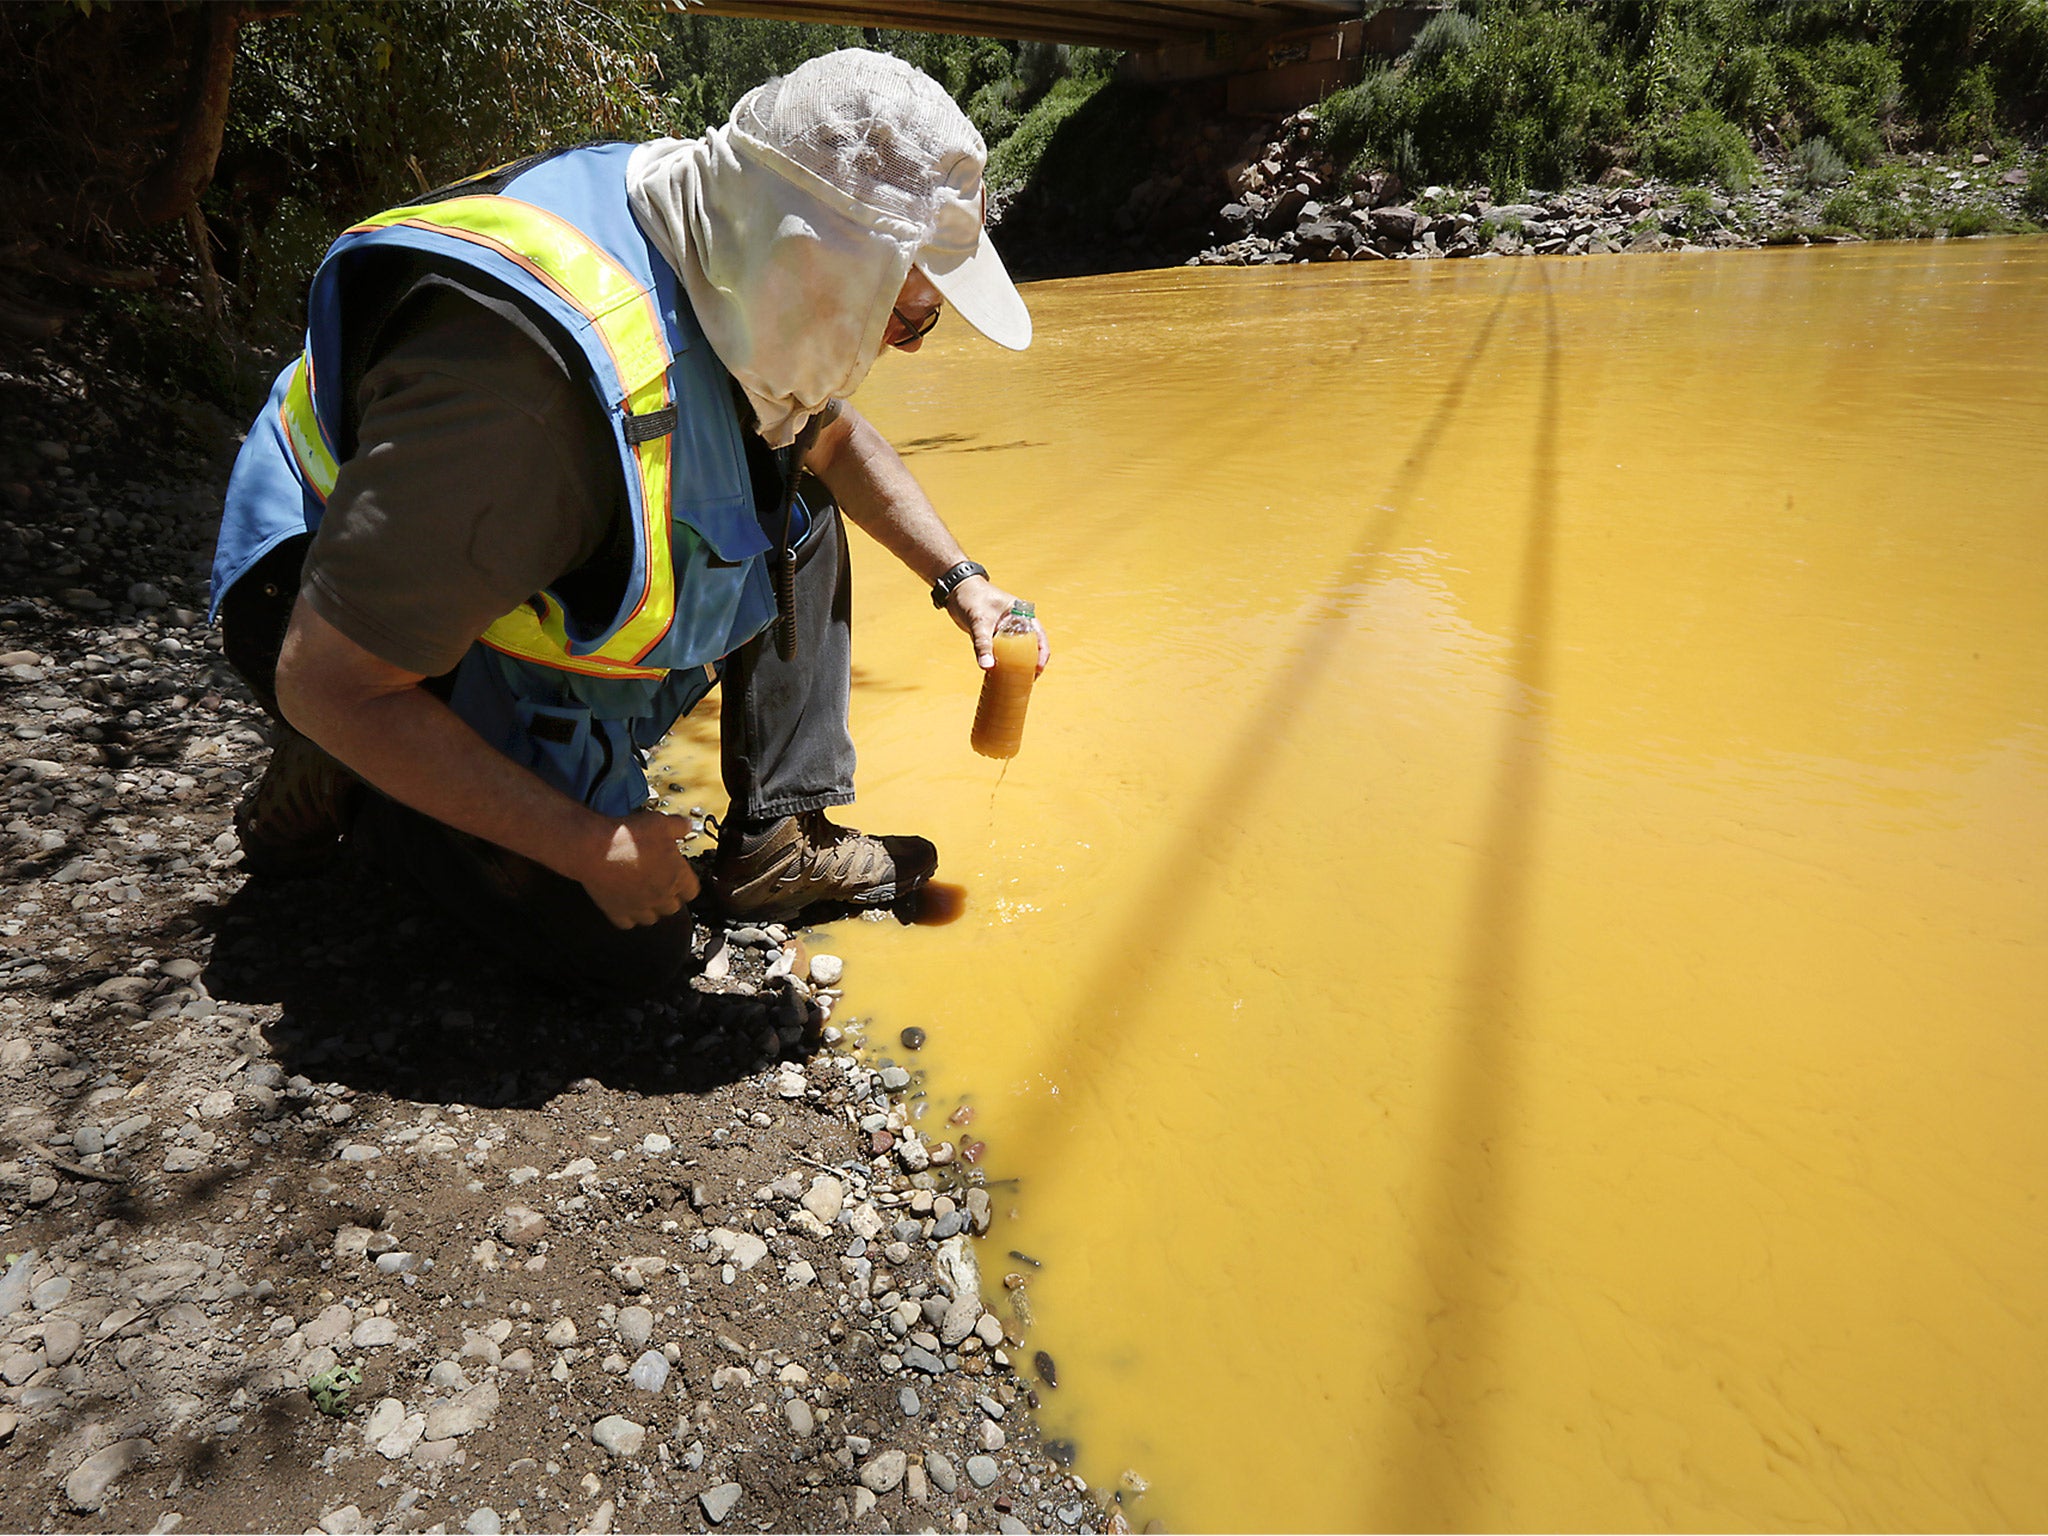 An environmental protection worker takes a sample from the polluted Animas river